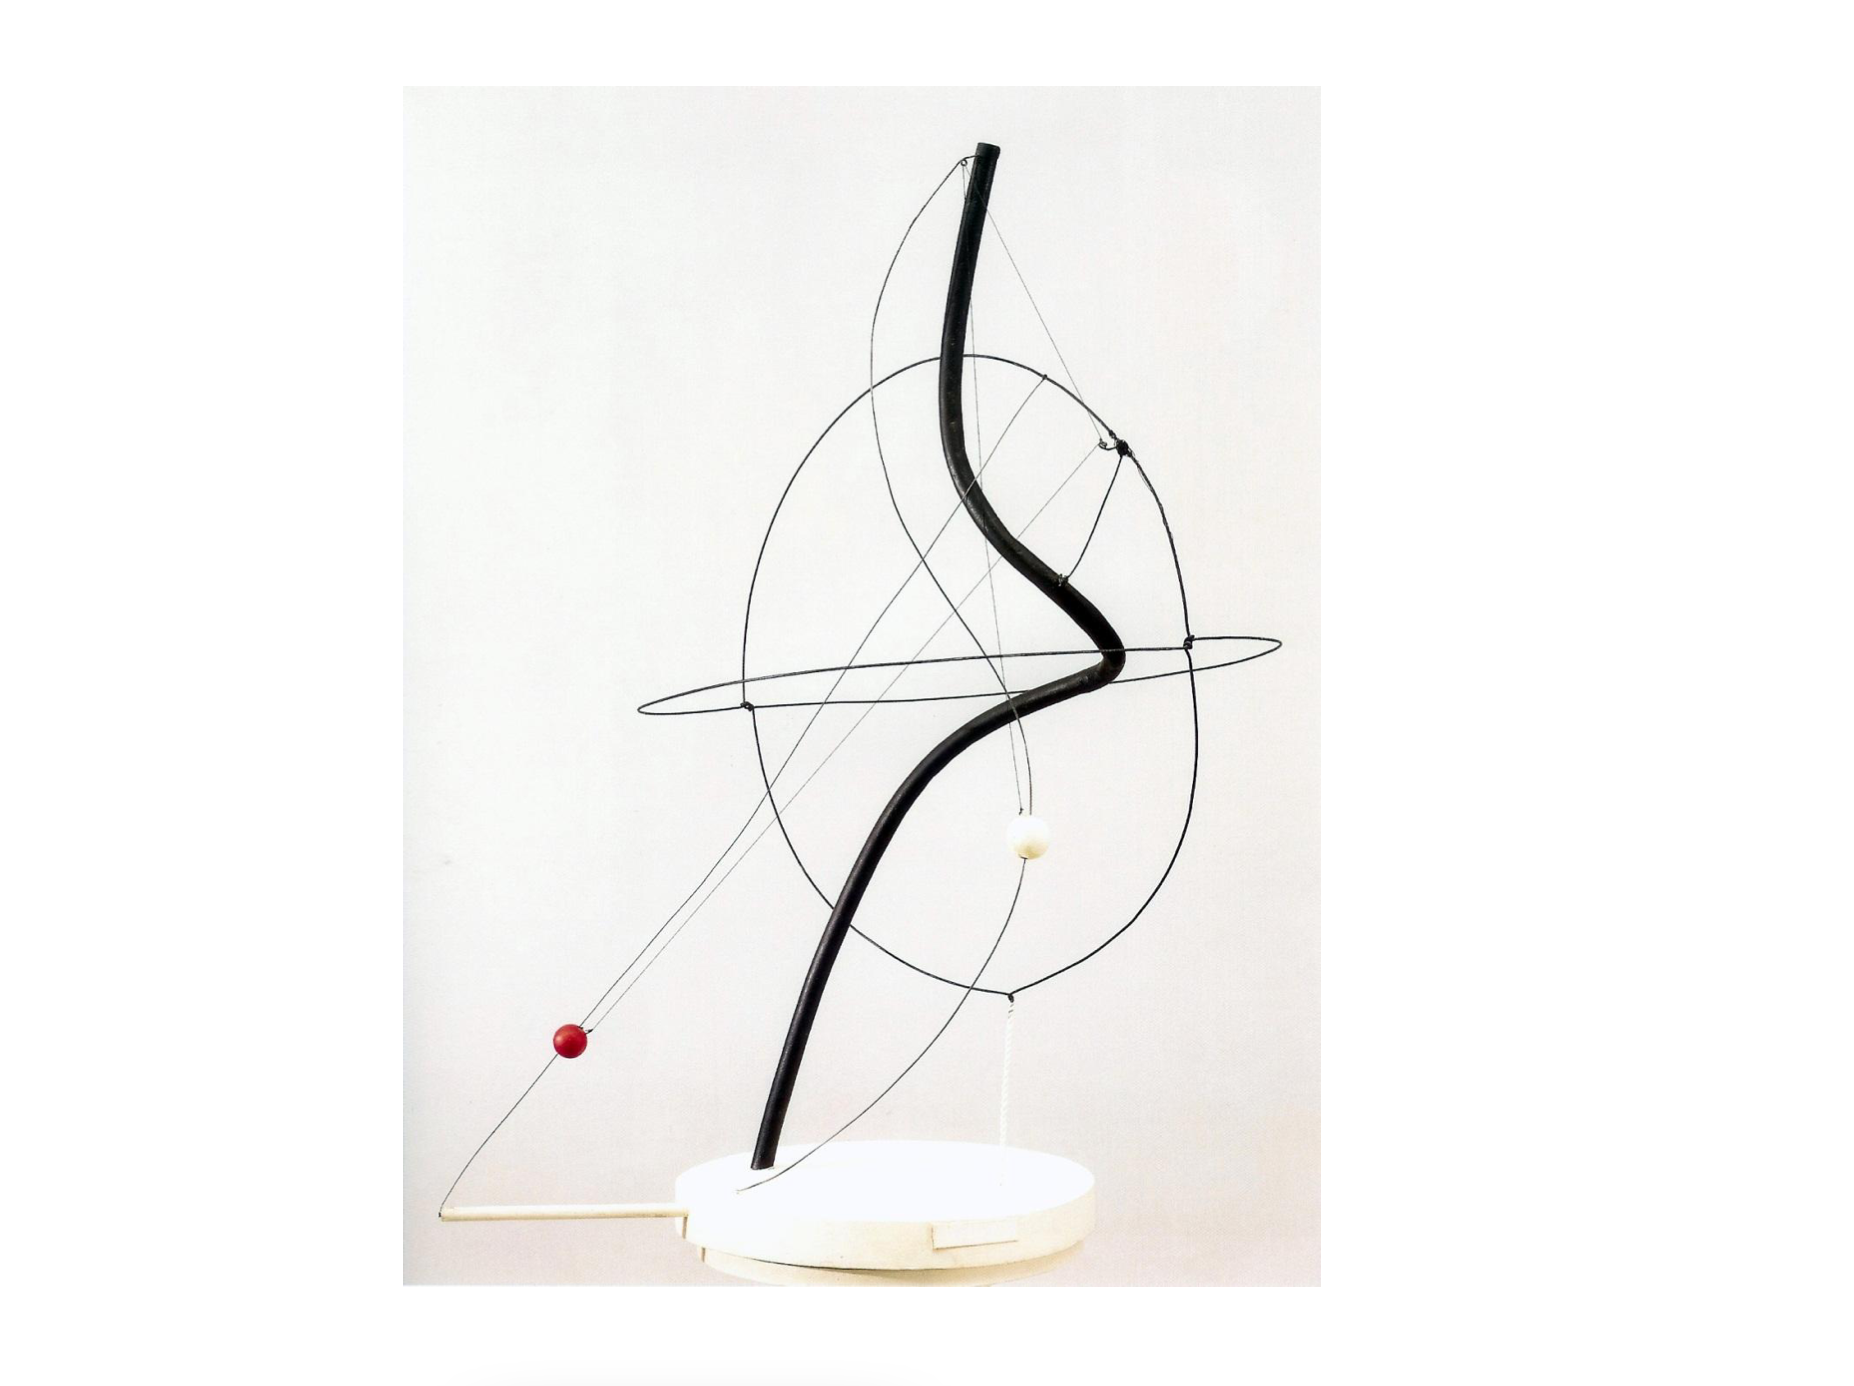 Man on a wire: The playful simplicity of Alexander Calder